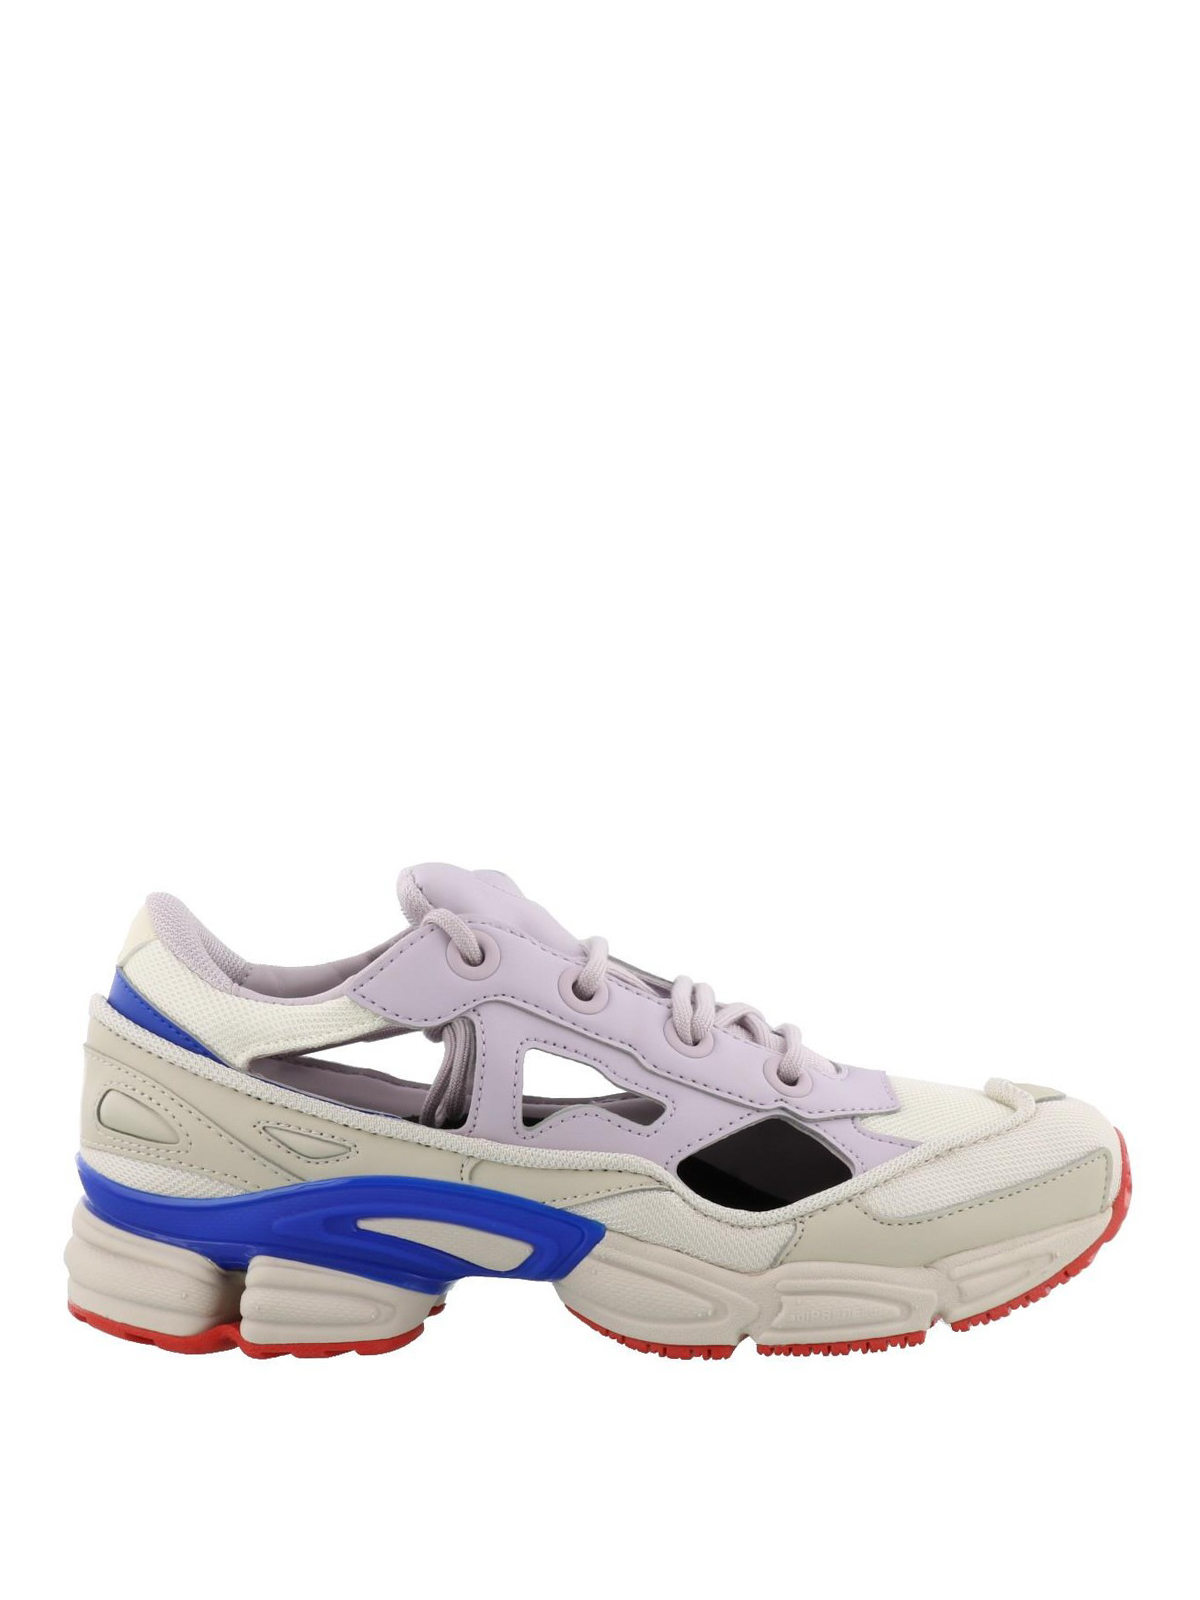 Weggegooid Logisch AIDS Trainers Raf Simons Adidas - Rs Replicant Ozweego cut out sneakers - F34237